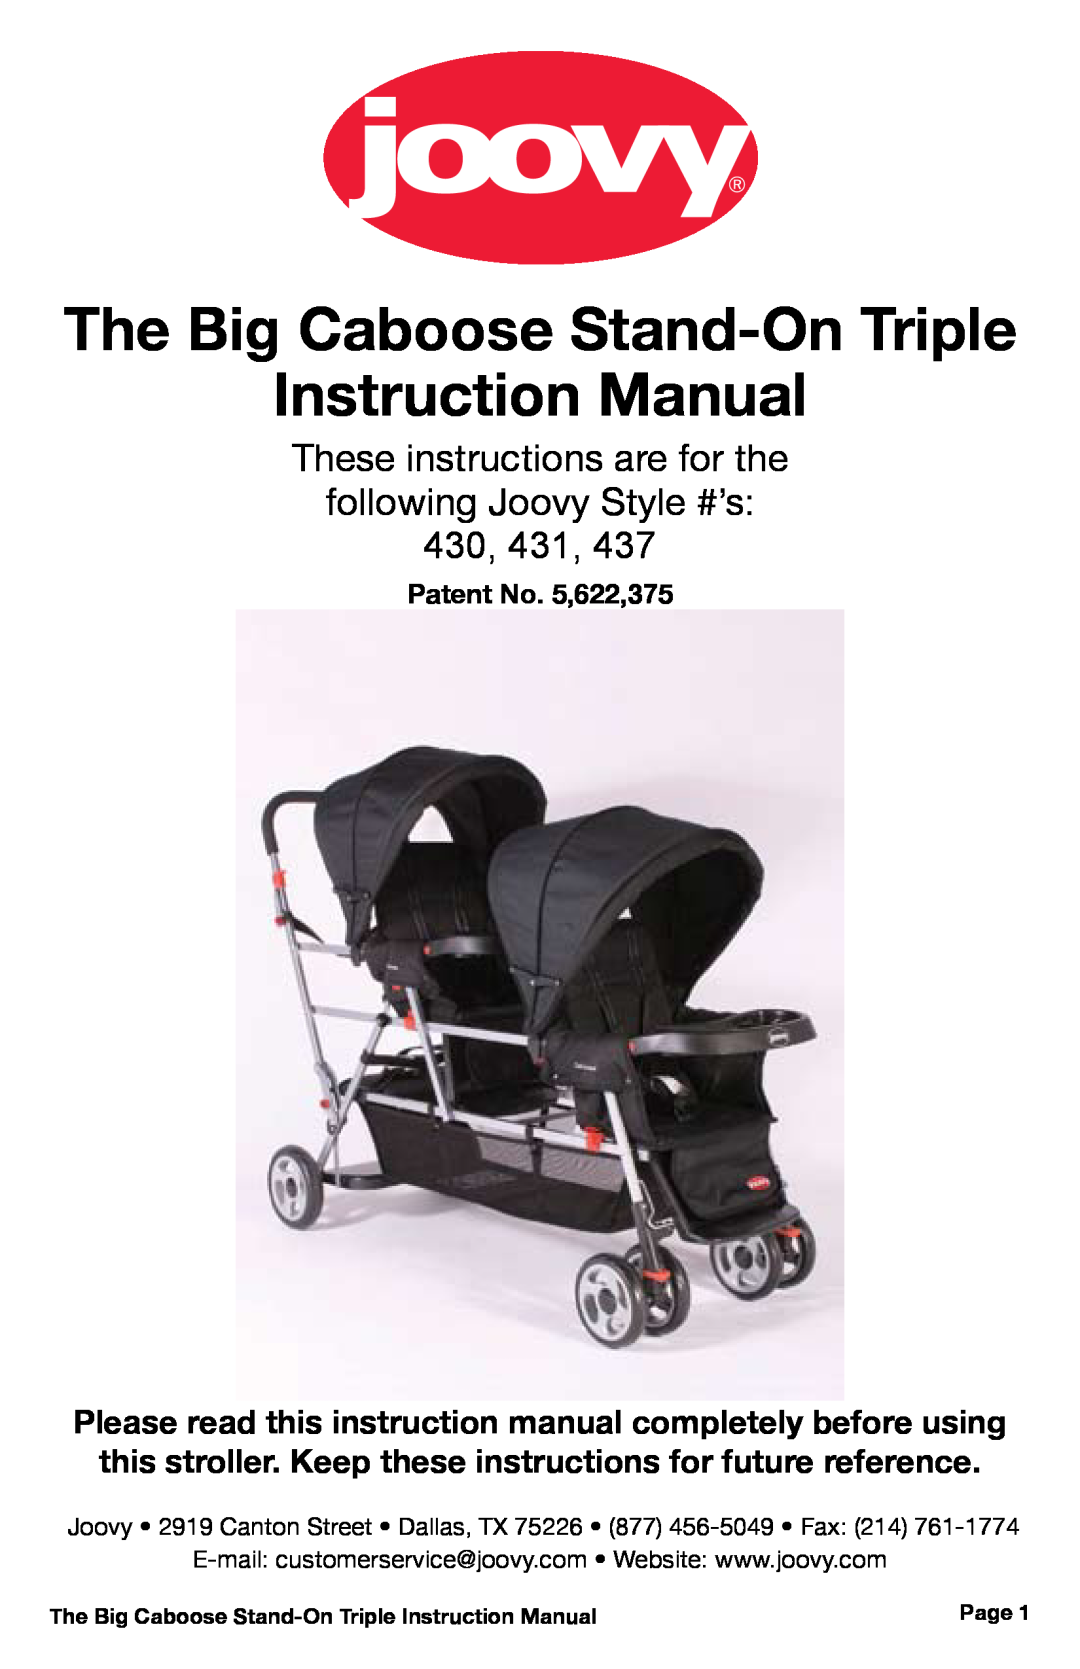 Chicco 430, 431, 437 manual Patent No. ,6,7, The Big Caboose Stand-On Triple Instruction Manual, Page 